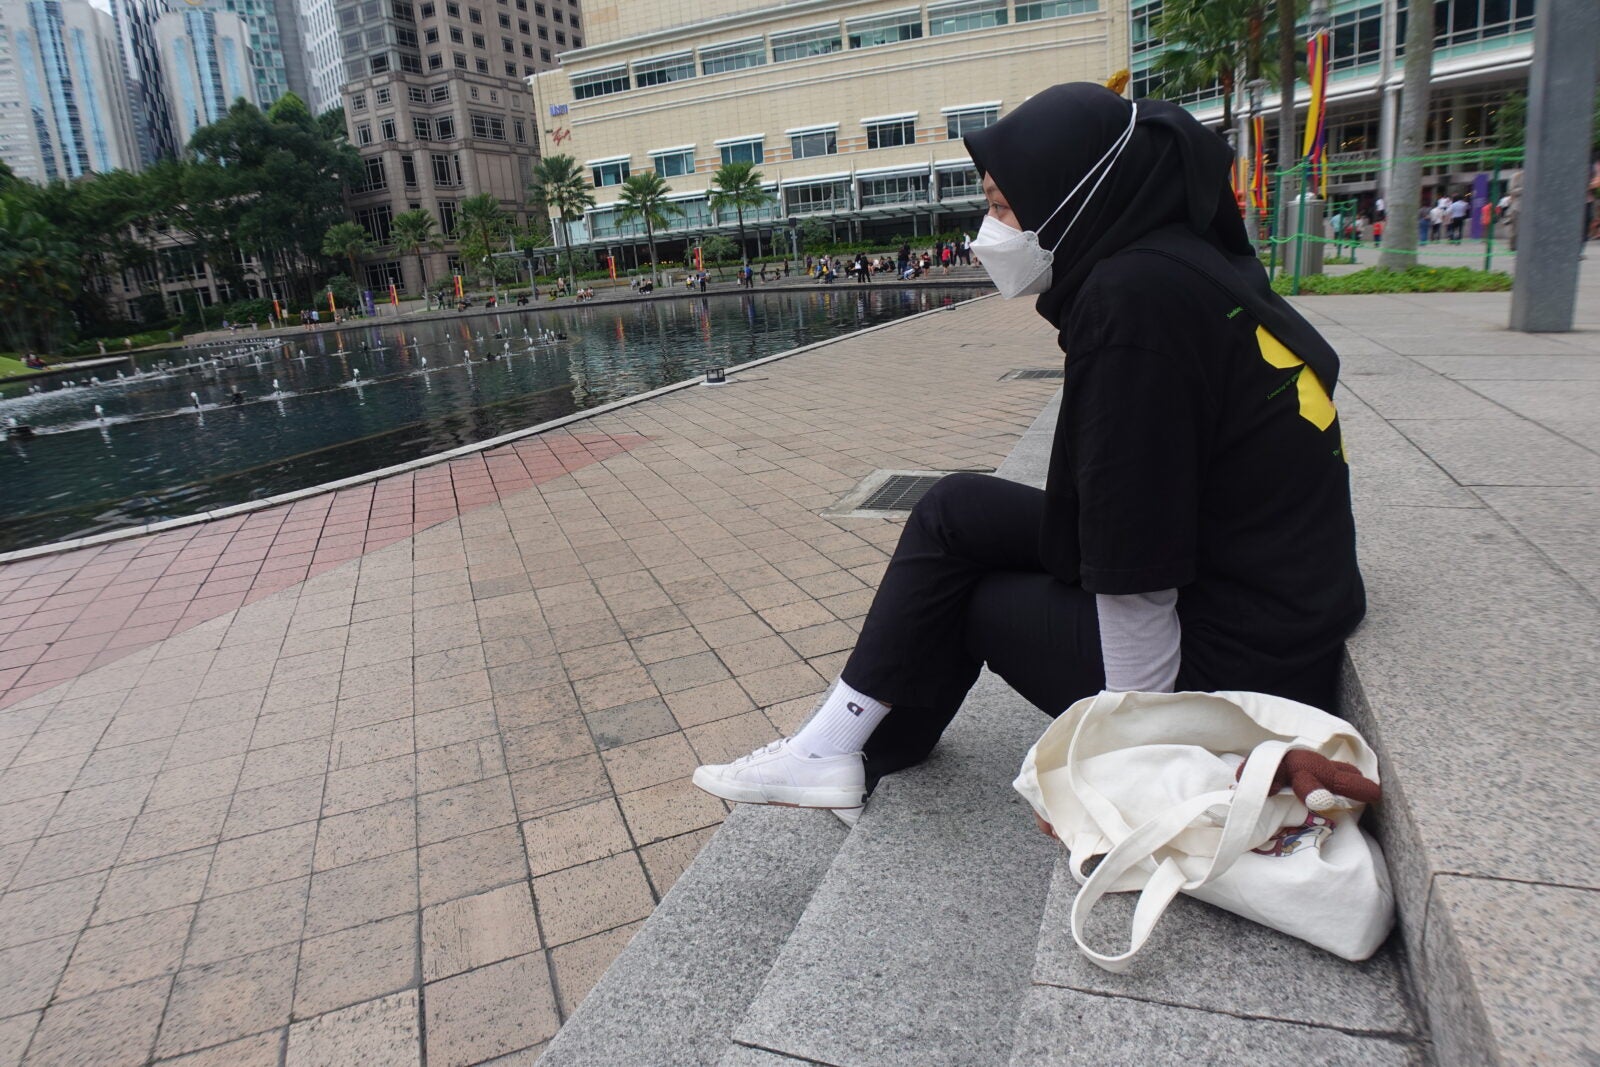 A Malay girl wearing black hijab, and a white face mask, sitting on the stairs at KLCC park.